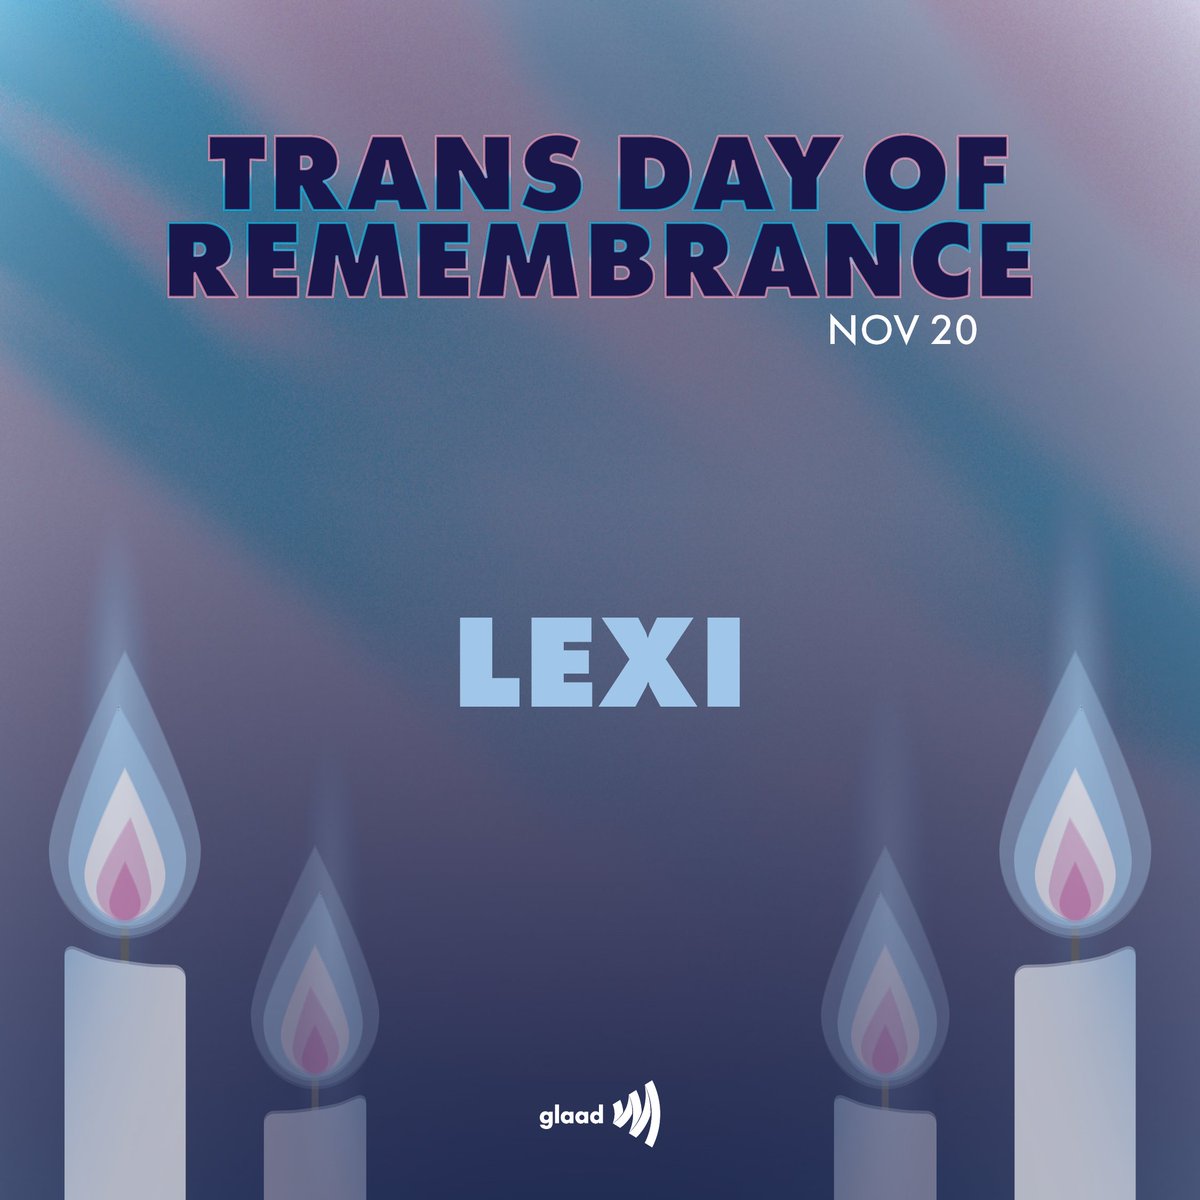 Lexi, a transgender woman, was killed in Harlem, New York on March 28, 2020. She was 33 years old. According to those who knew her, Lexi had a “beautiful heart” and loved poetry, makeup, and fashion.